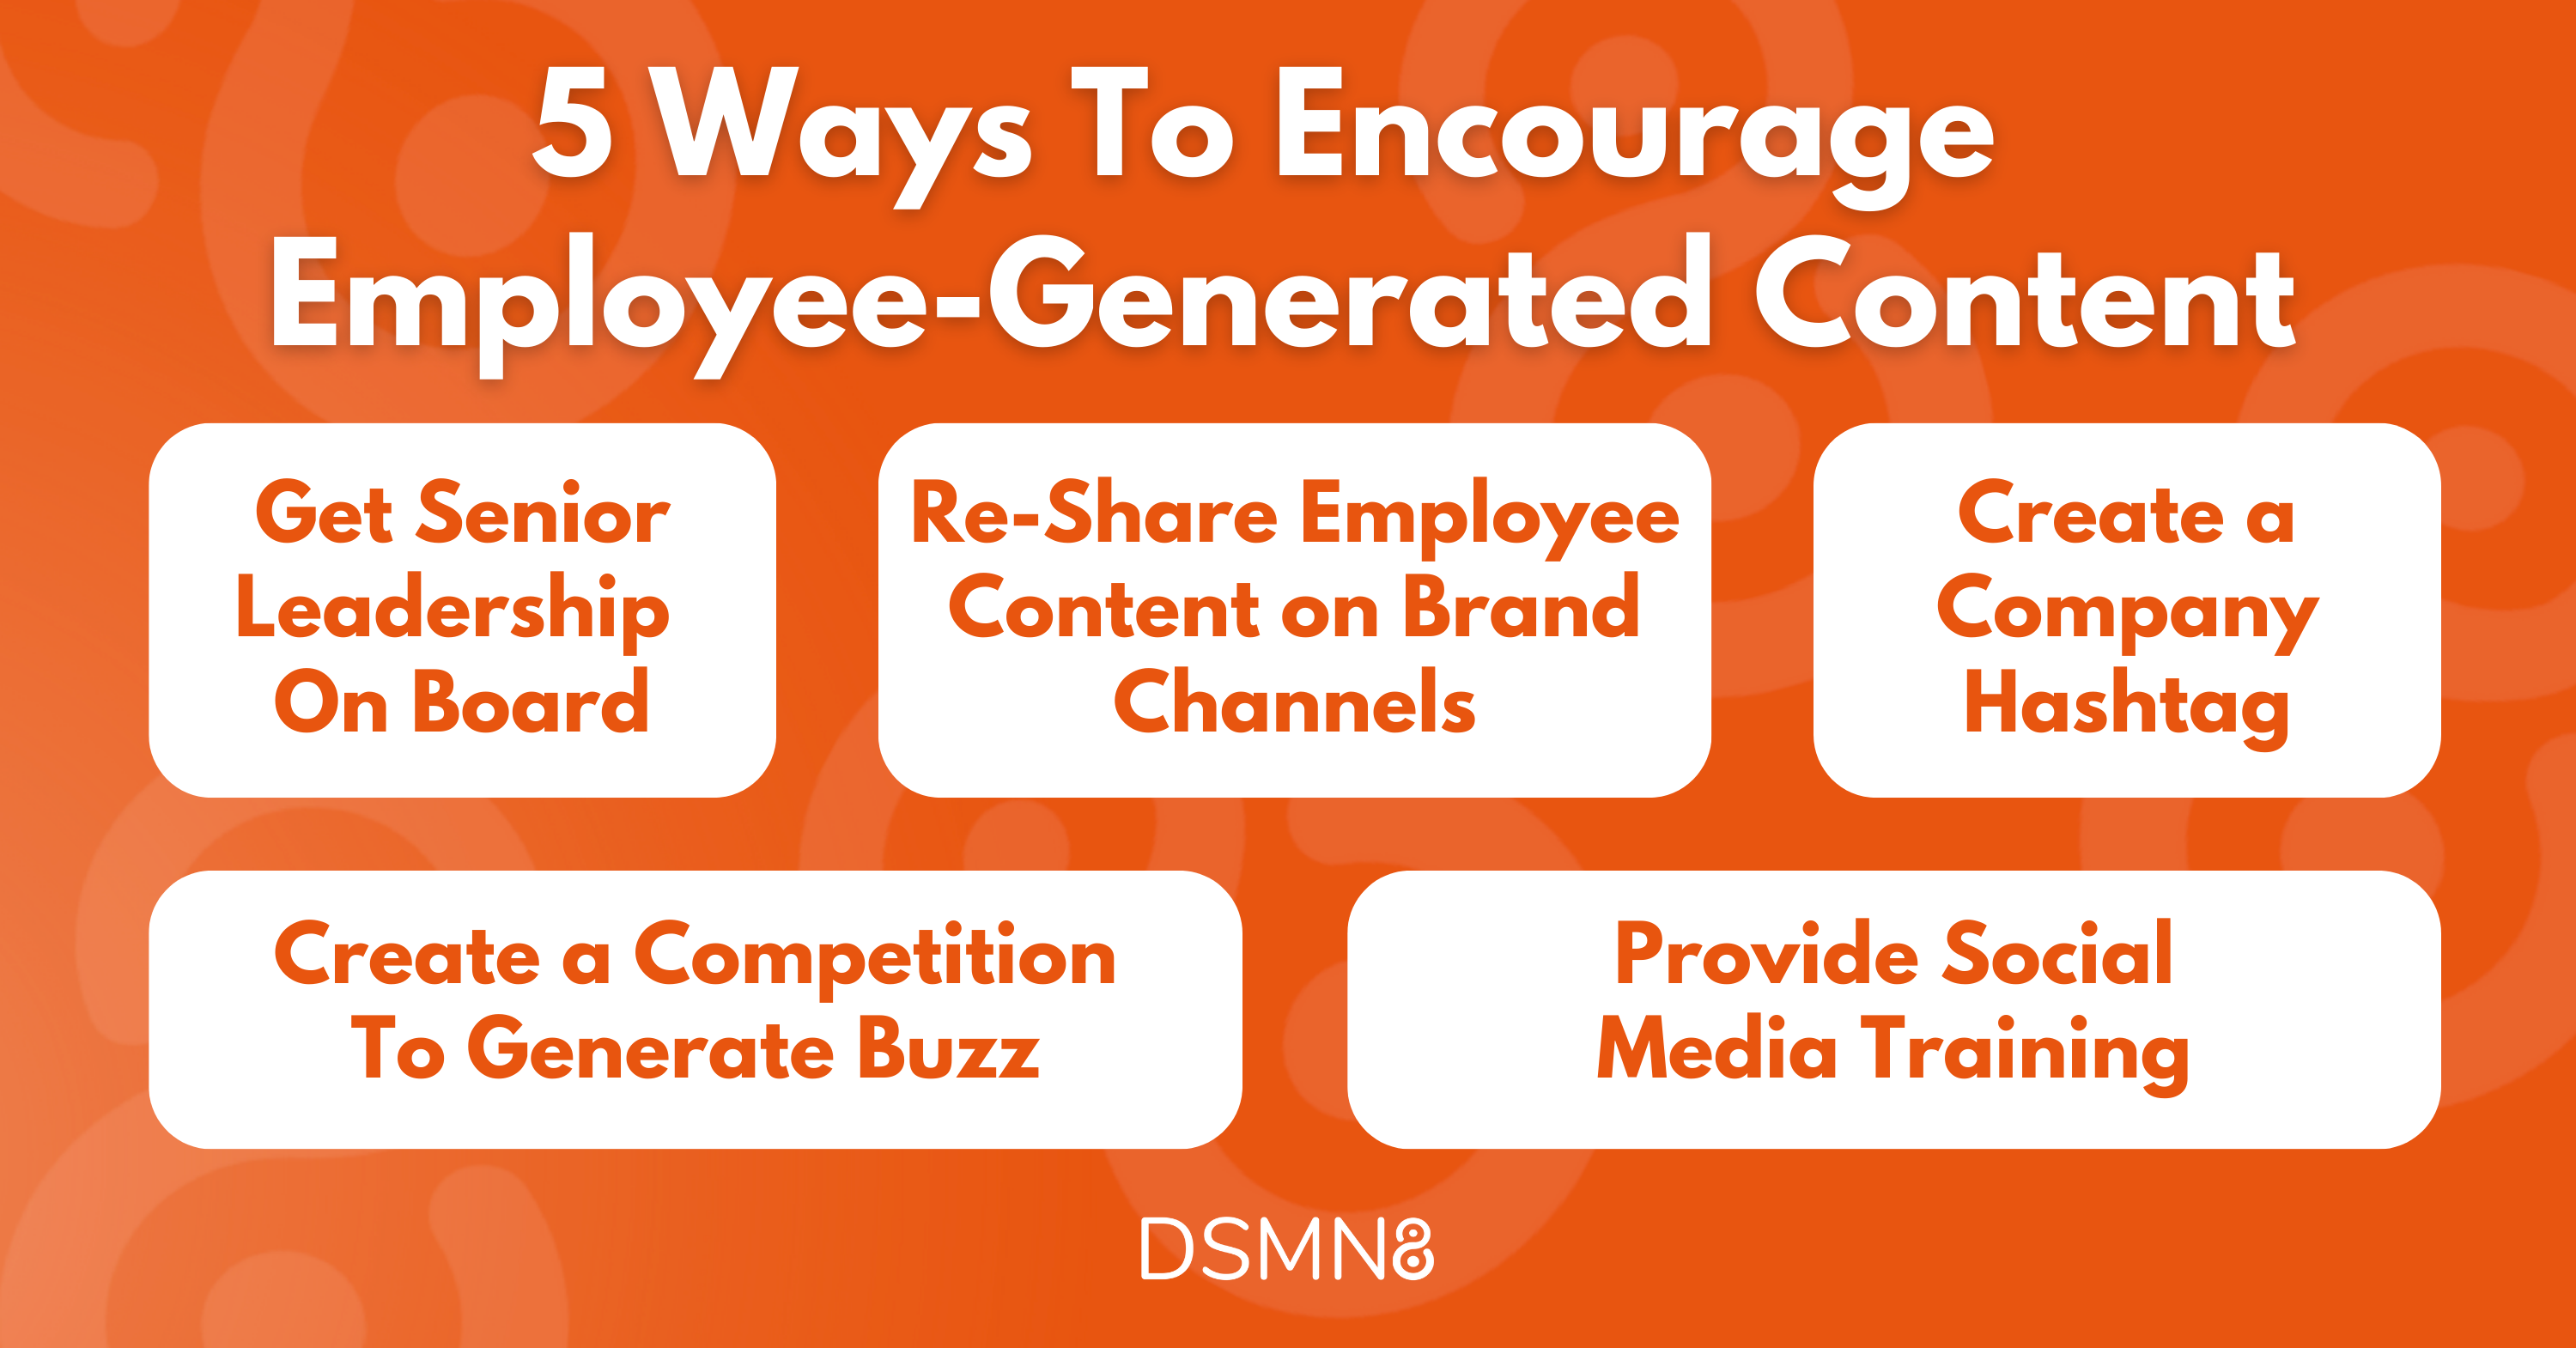 5 ways to encourage employee-generated content